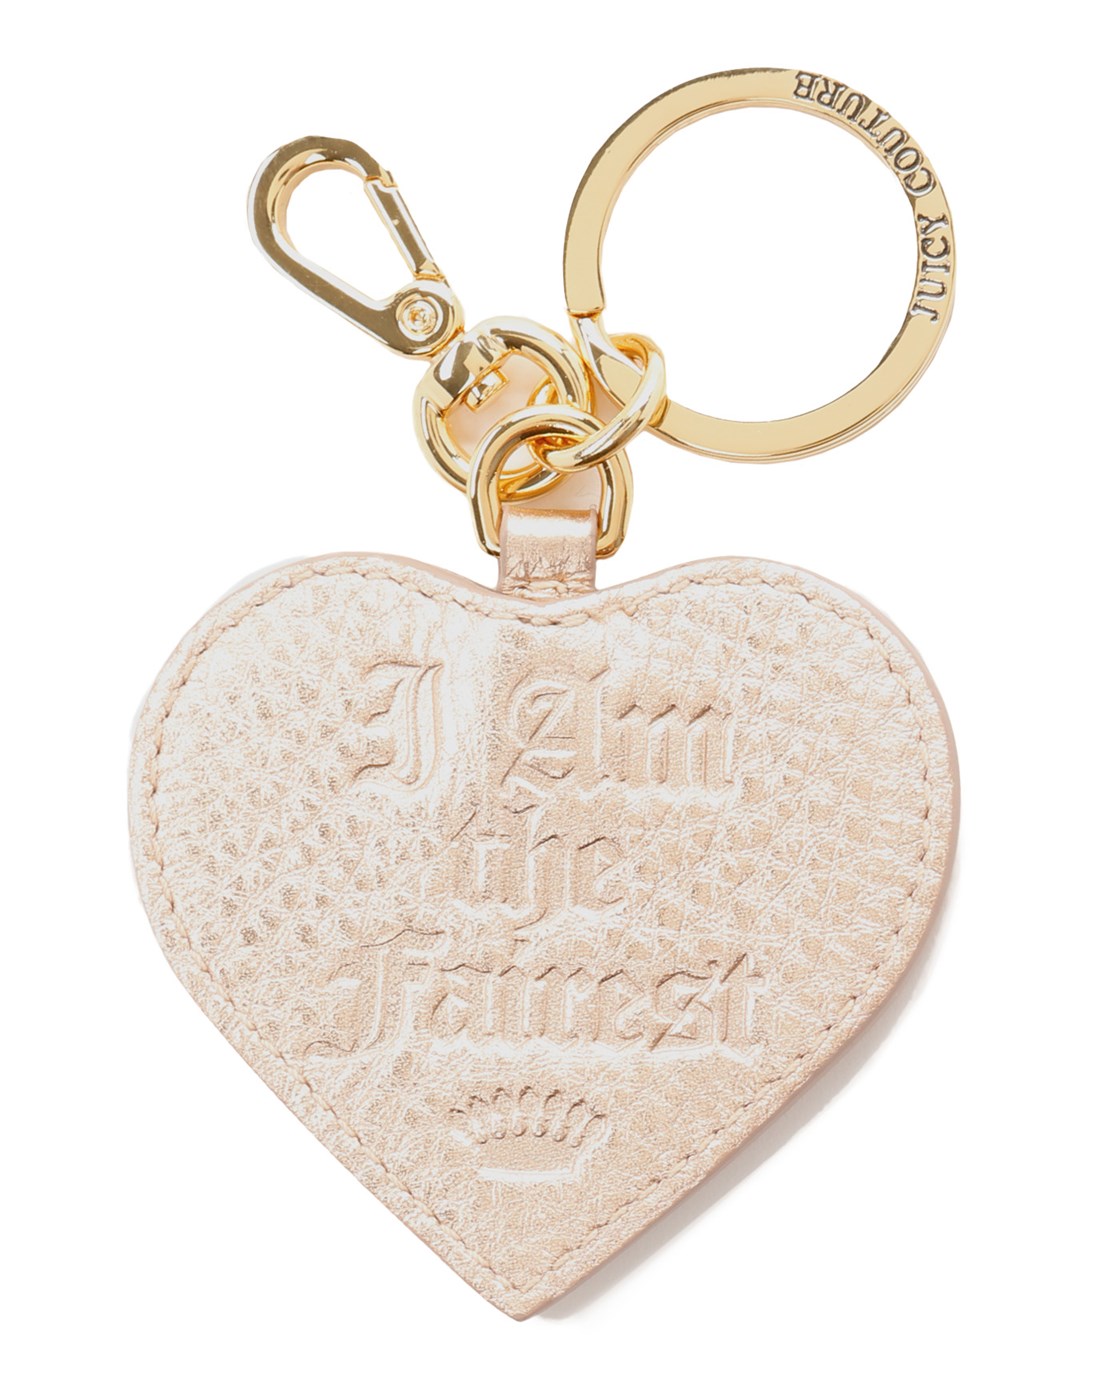 Juicy Couture I Am the Fairest Leather Key Fob